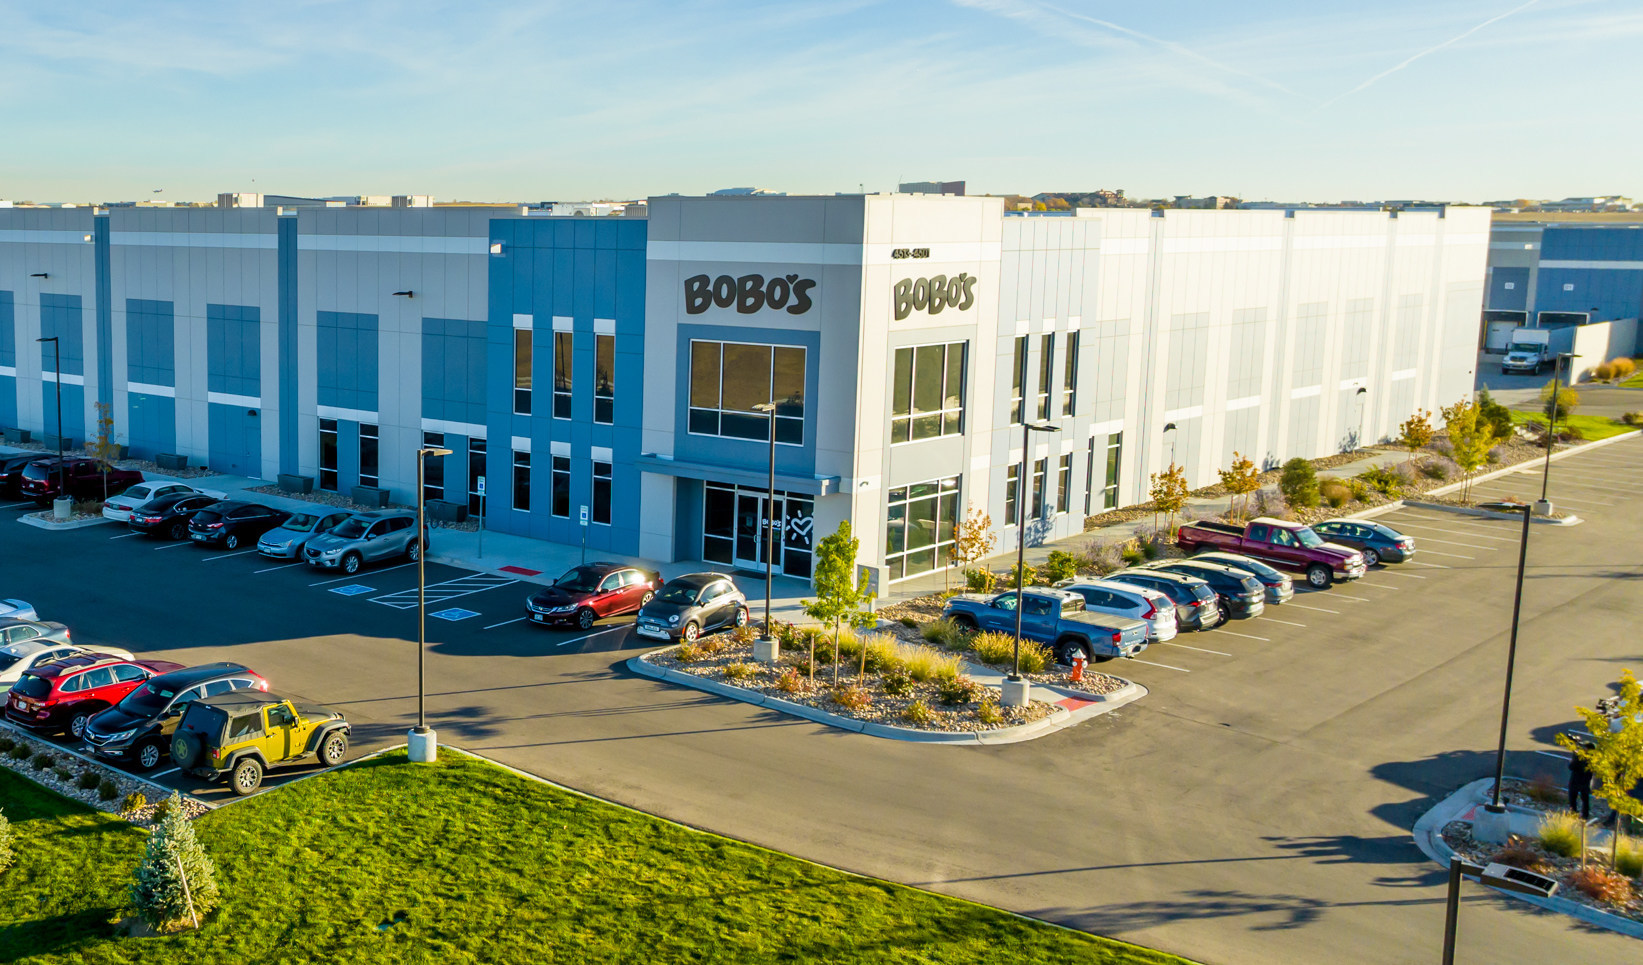 Bobo’s Launches New, Wind Powered Production Facility In Loveland, CO, Increasing Output By 3x While Reducing Carbon Emissions